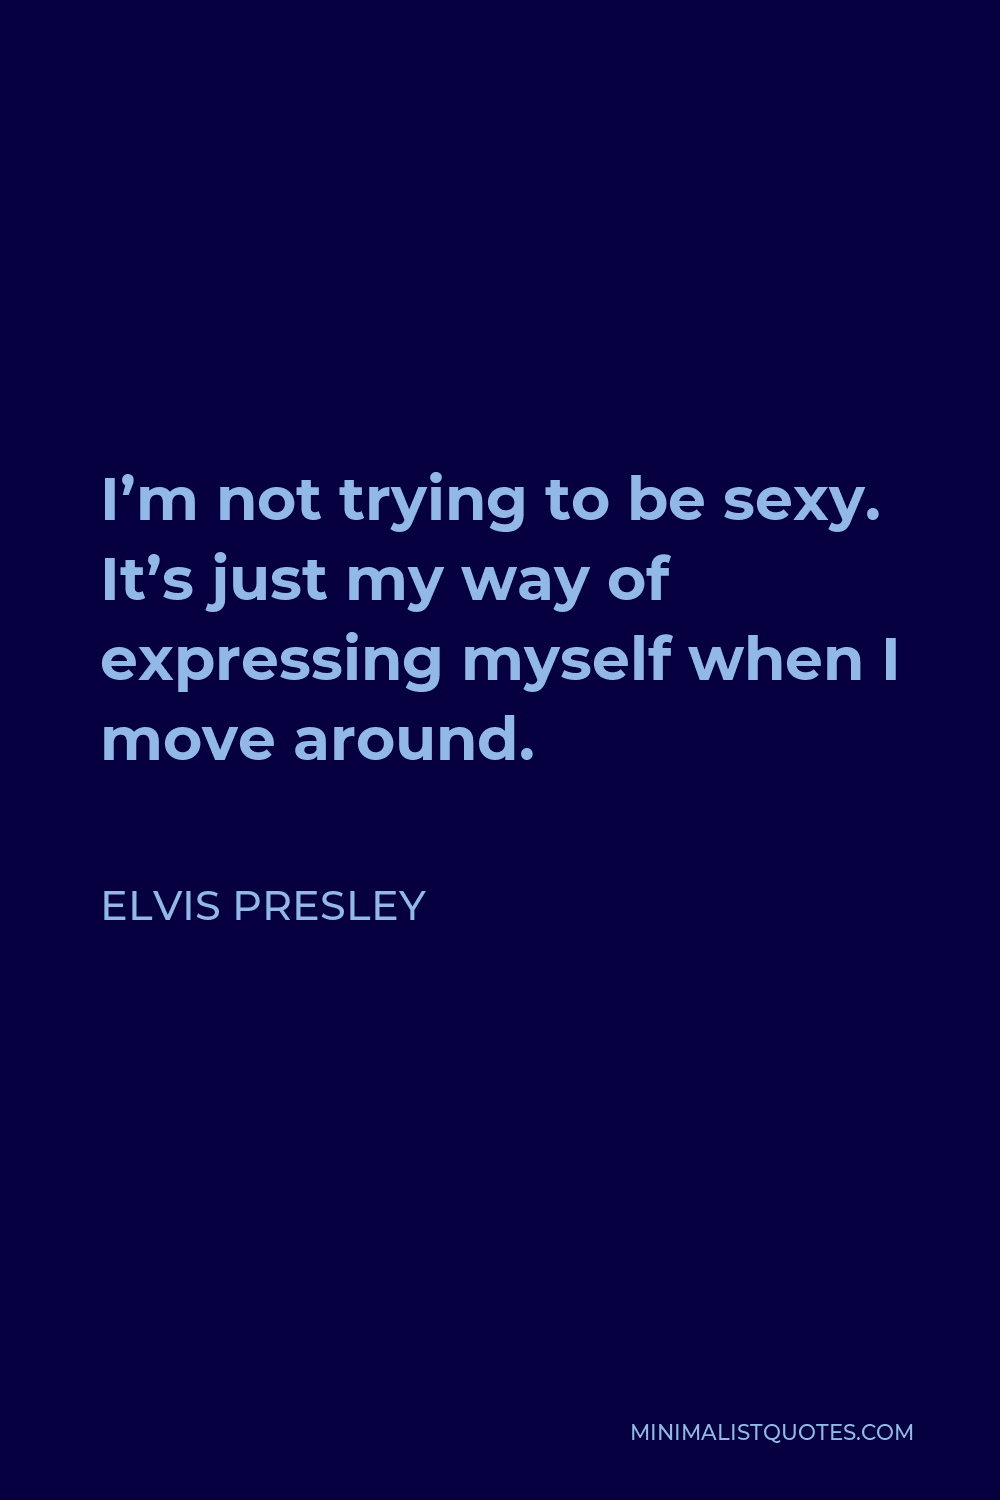 Elvis Presley Quote - I’m not trying to be sexy. It’s just my way of expressing myself when I move around.